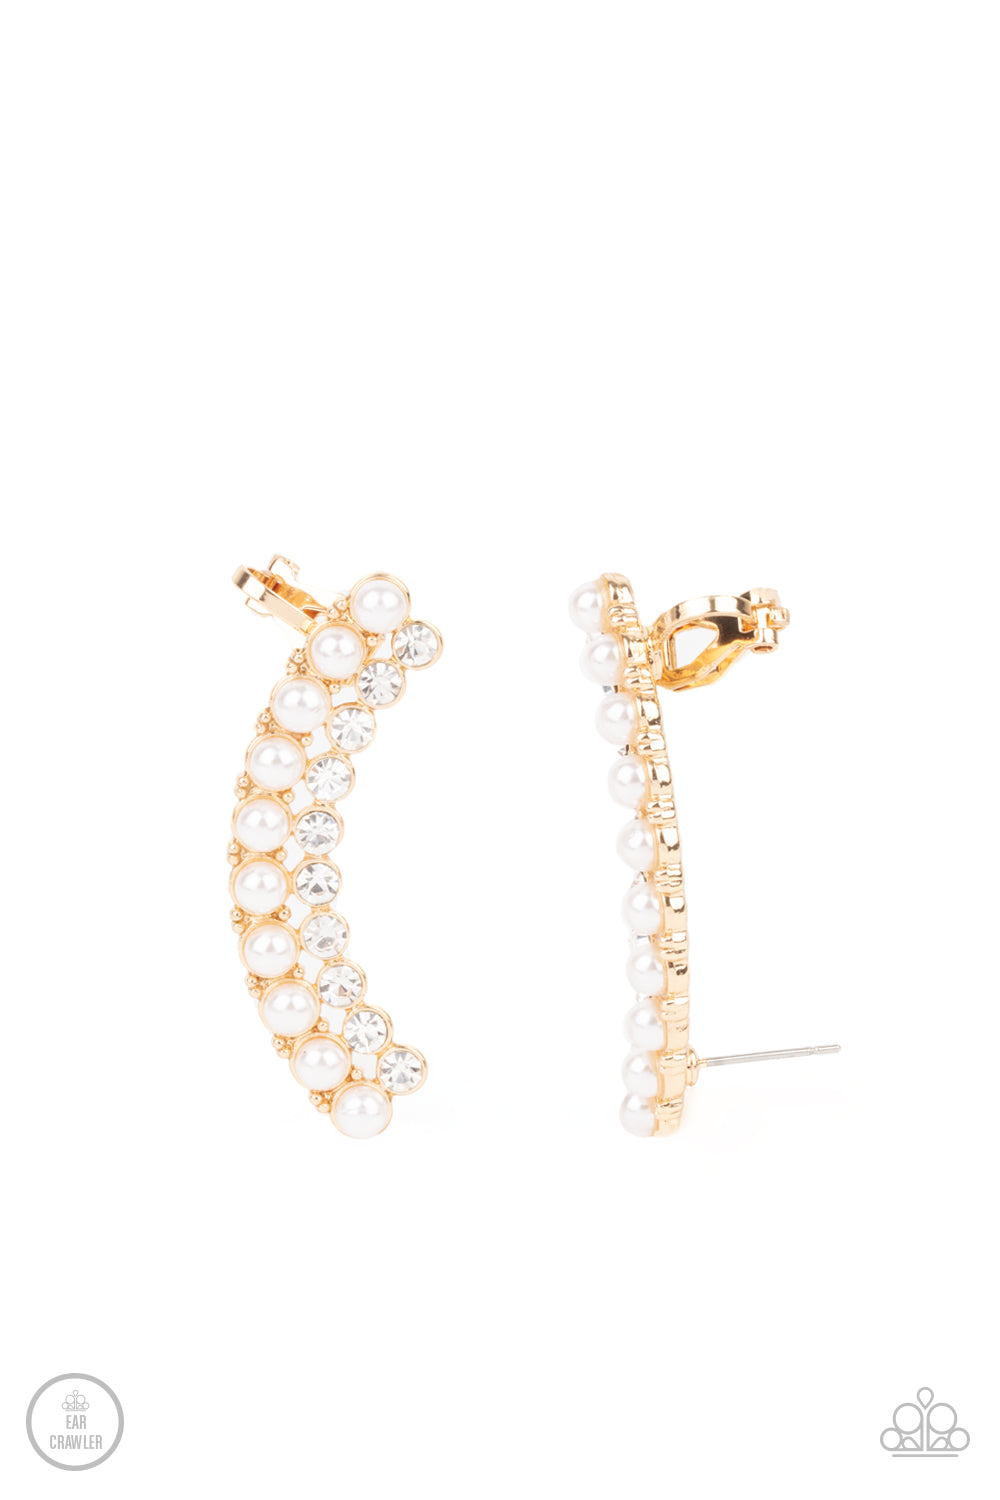 Doubled Down On Dazzle Gold Ear Crawler Earring - Paparazzi Accessories  Featuring classic gold fittings, two rows of dainty white pearls and glassy white rhinestones arch into a timeless statement piece. Earring attaches to a standard post earring. Features a clip-on fitting at the top for a secure fit.  Sold as one pair of ear crawlers.